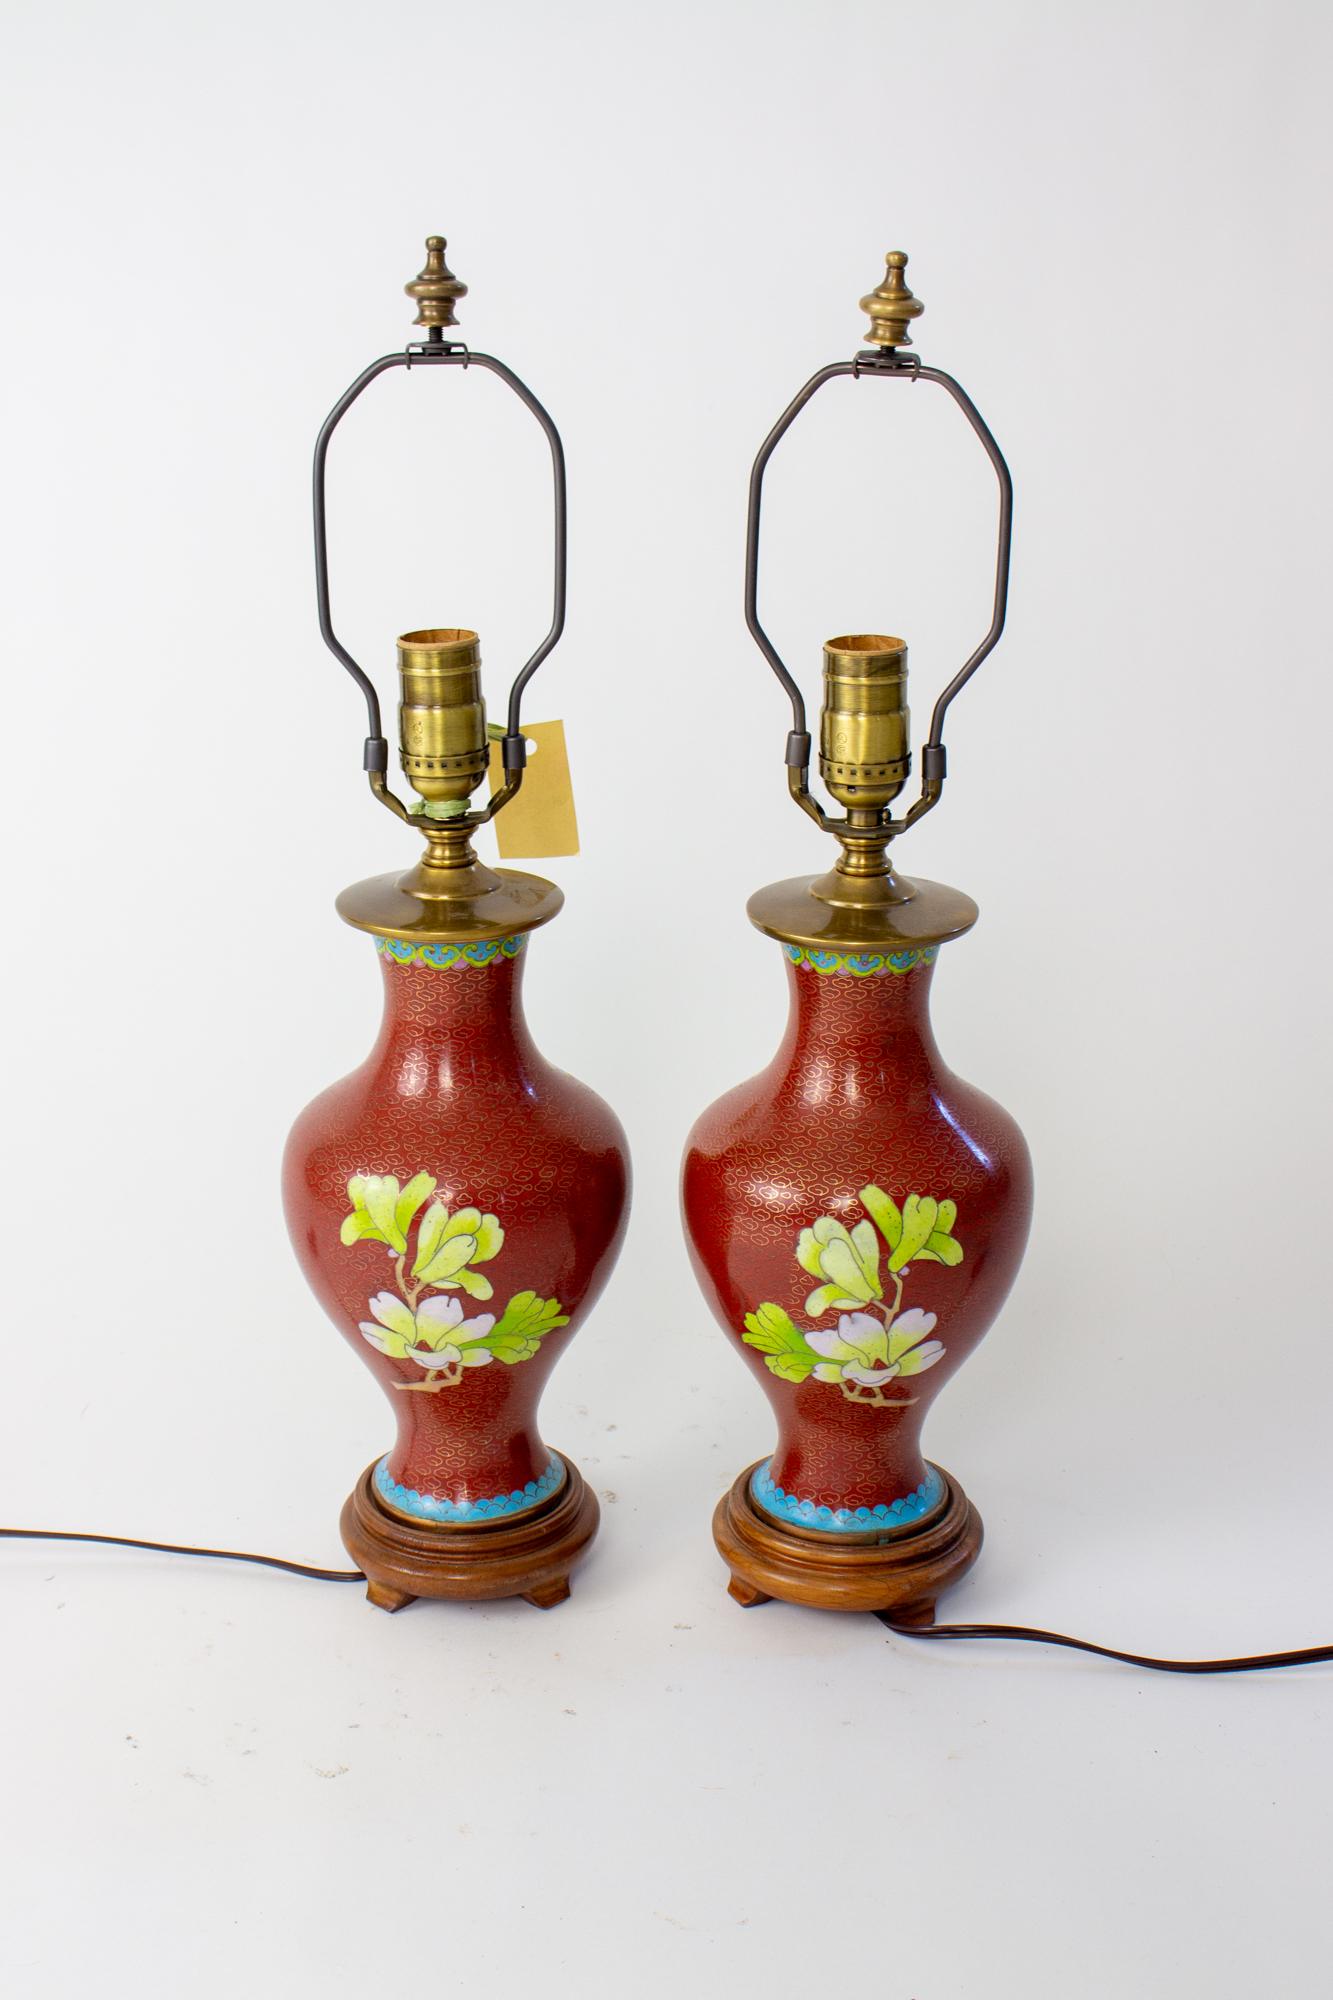 Mid 20th Century chrysanthemum cloisonne table lamps, a pair. Brick red background with orange and pink chrysanthemums, an orange and black butterfly, and magnolia blossoms on the back. Accent colors of green and bright blue. Mid 20th Century